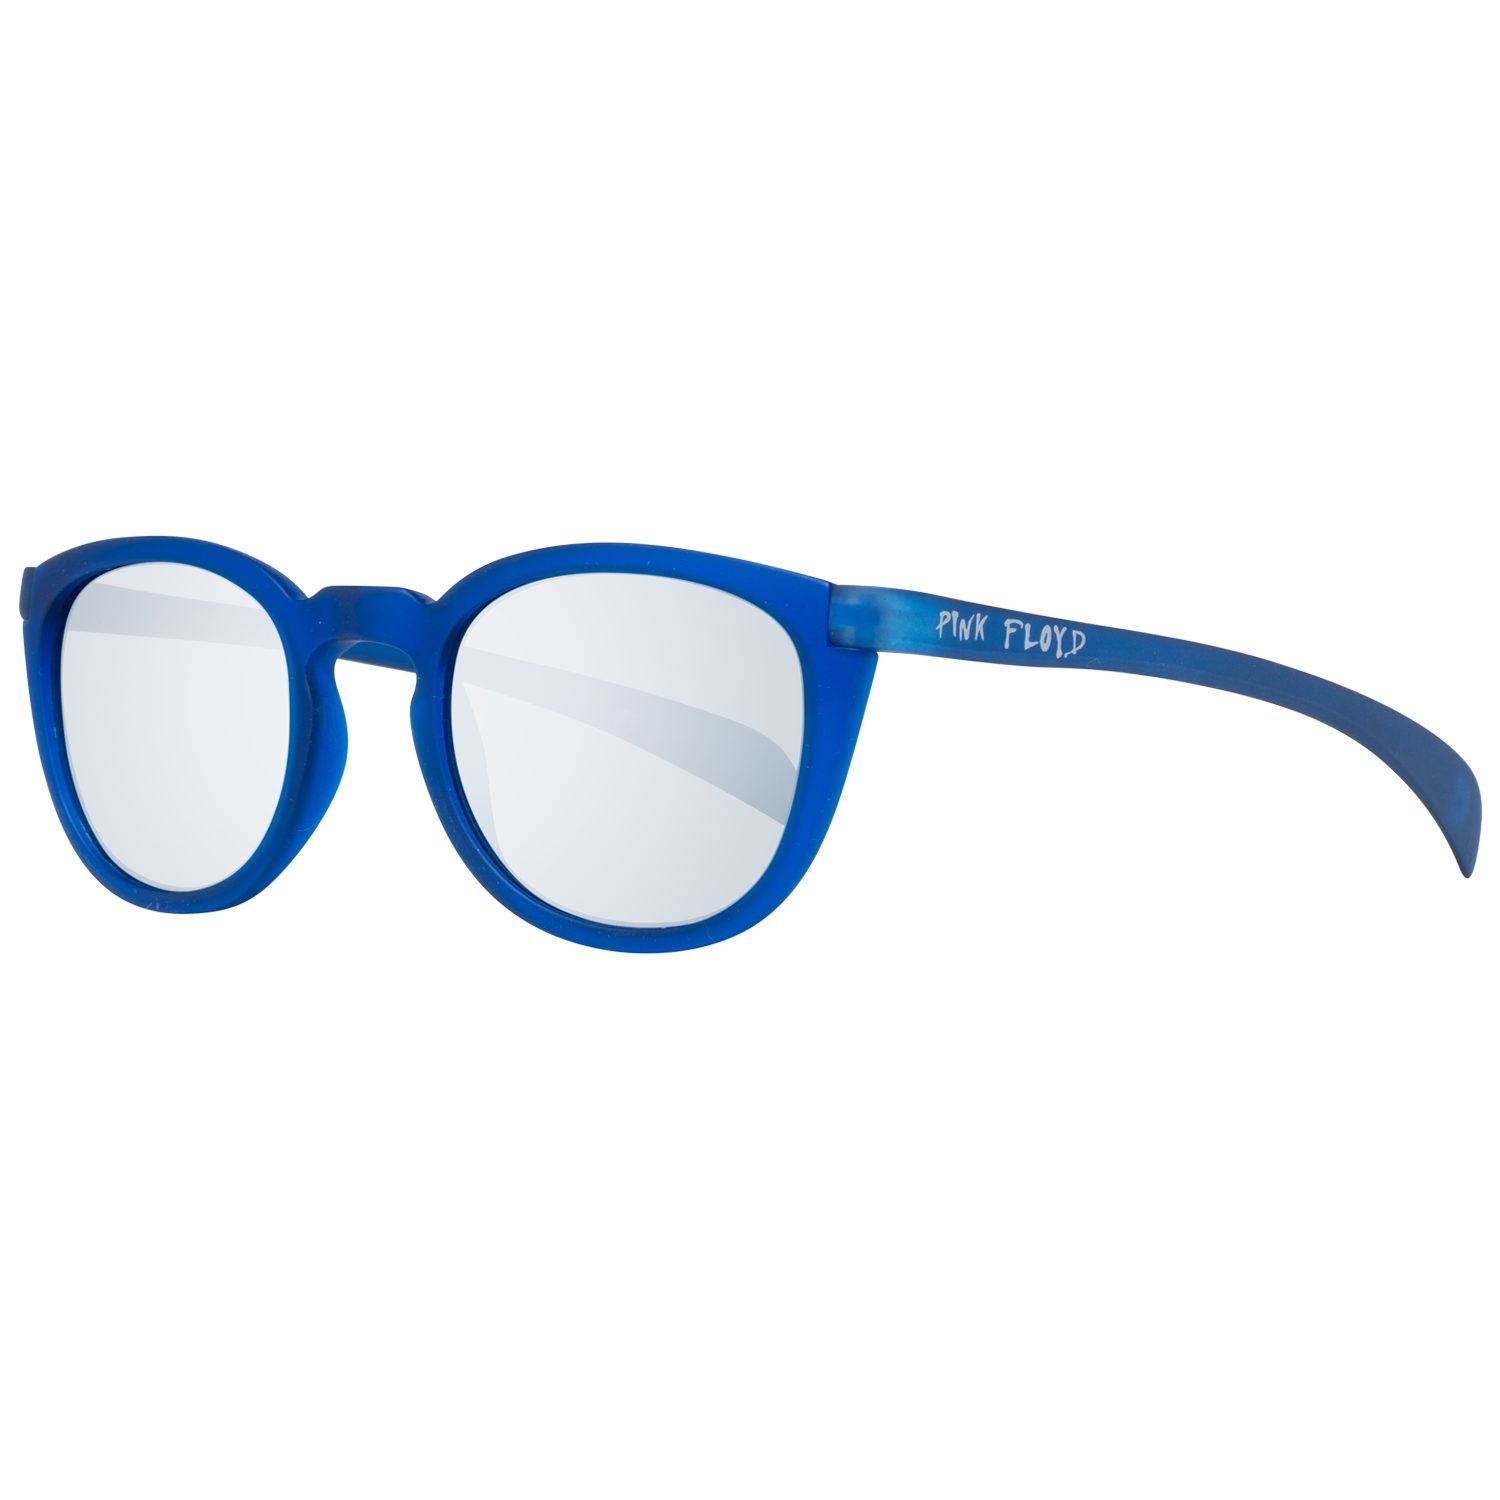 Try Cover Change Sonnenbrille TS503 4803